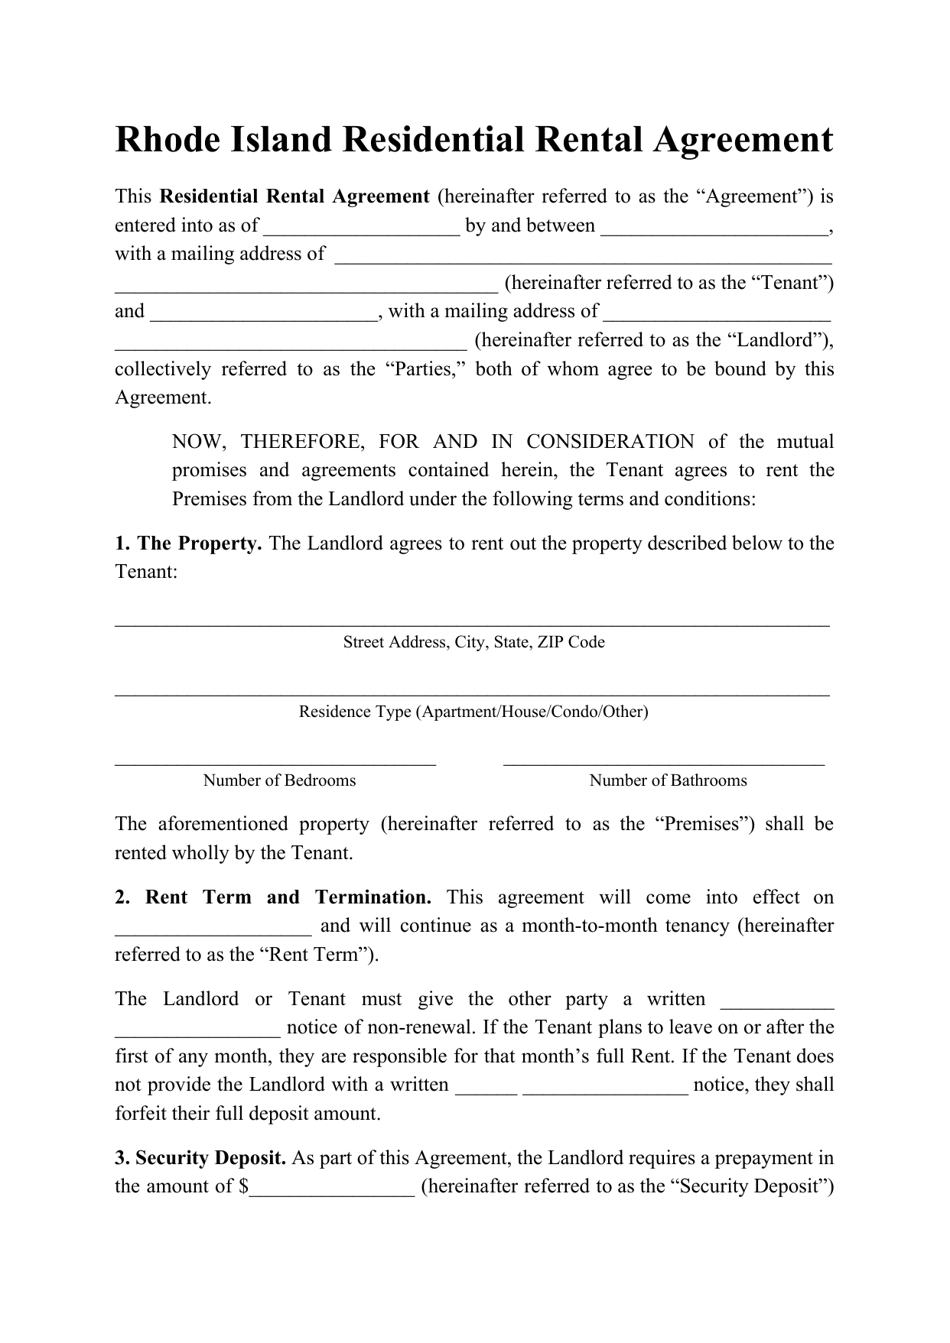 Residential Rental Agreement Template - Rhode Island, Page 1